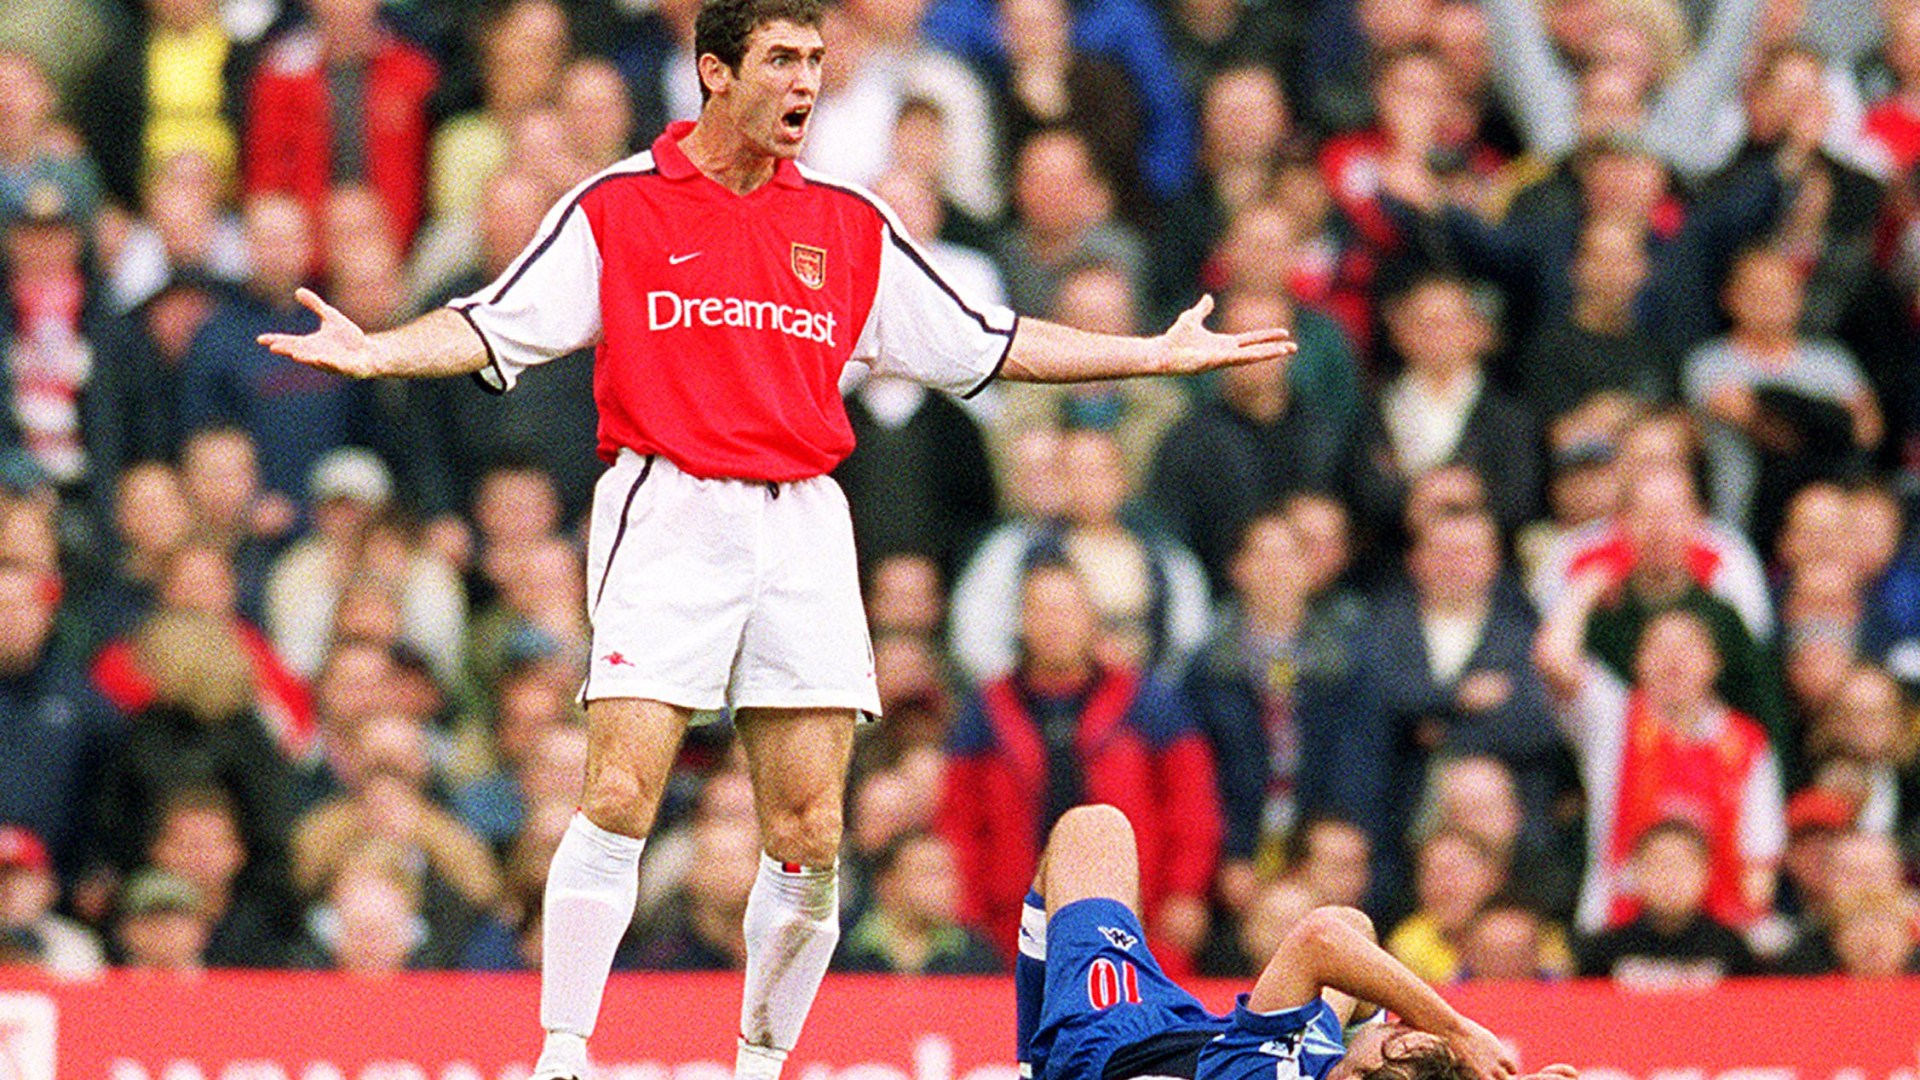 Martin Keown was like a 'psycho' who fought for Arsenal until he dropped - we saved Paolo Di Canio from him